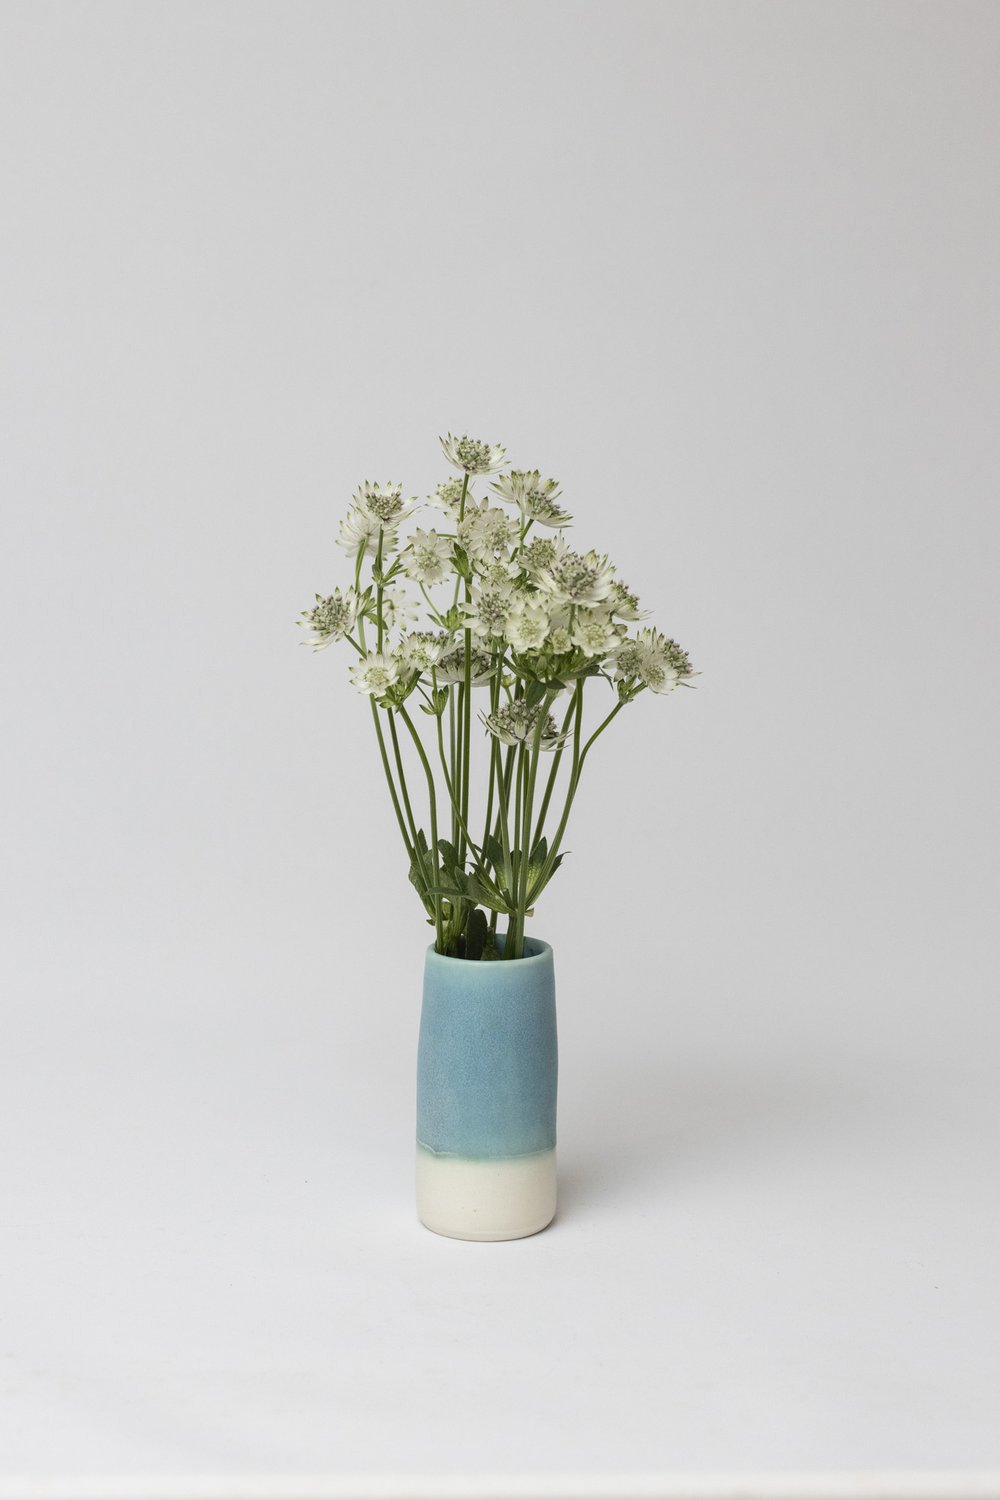 Small turquoise cylinder vase - £21 - Paper Thin Moon